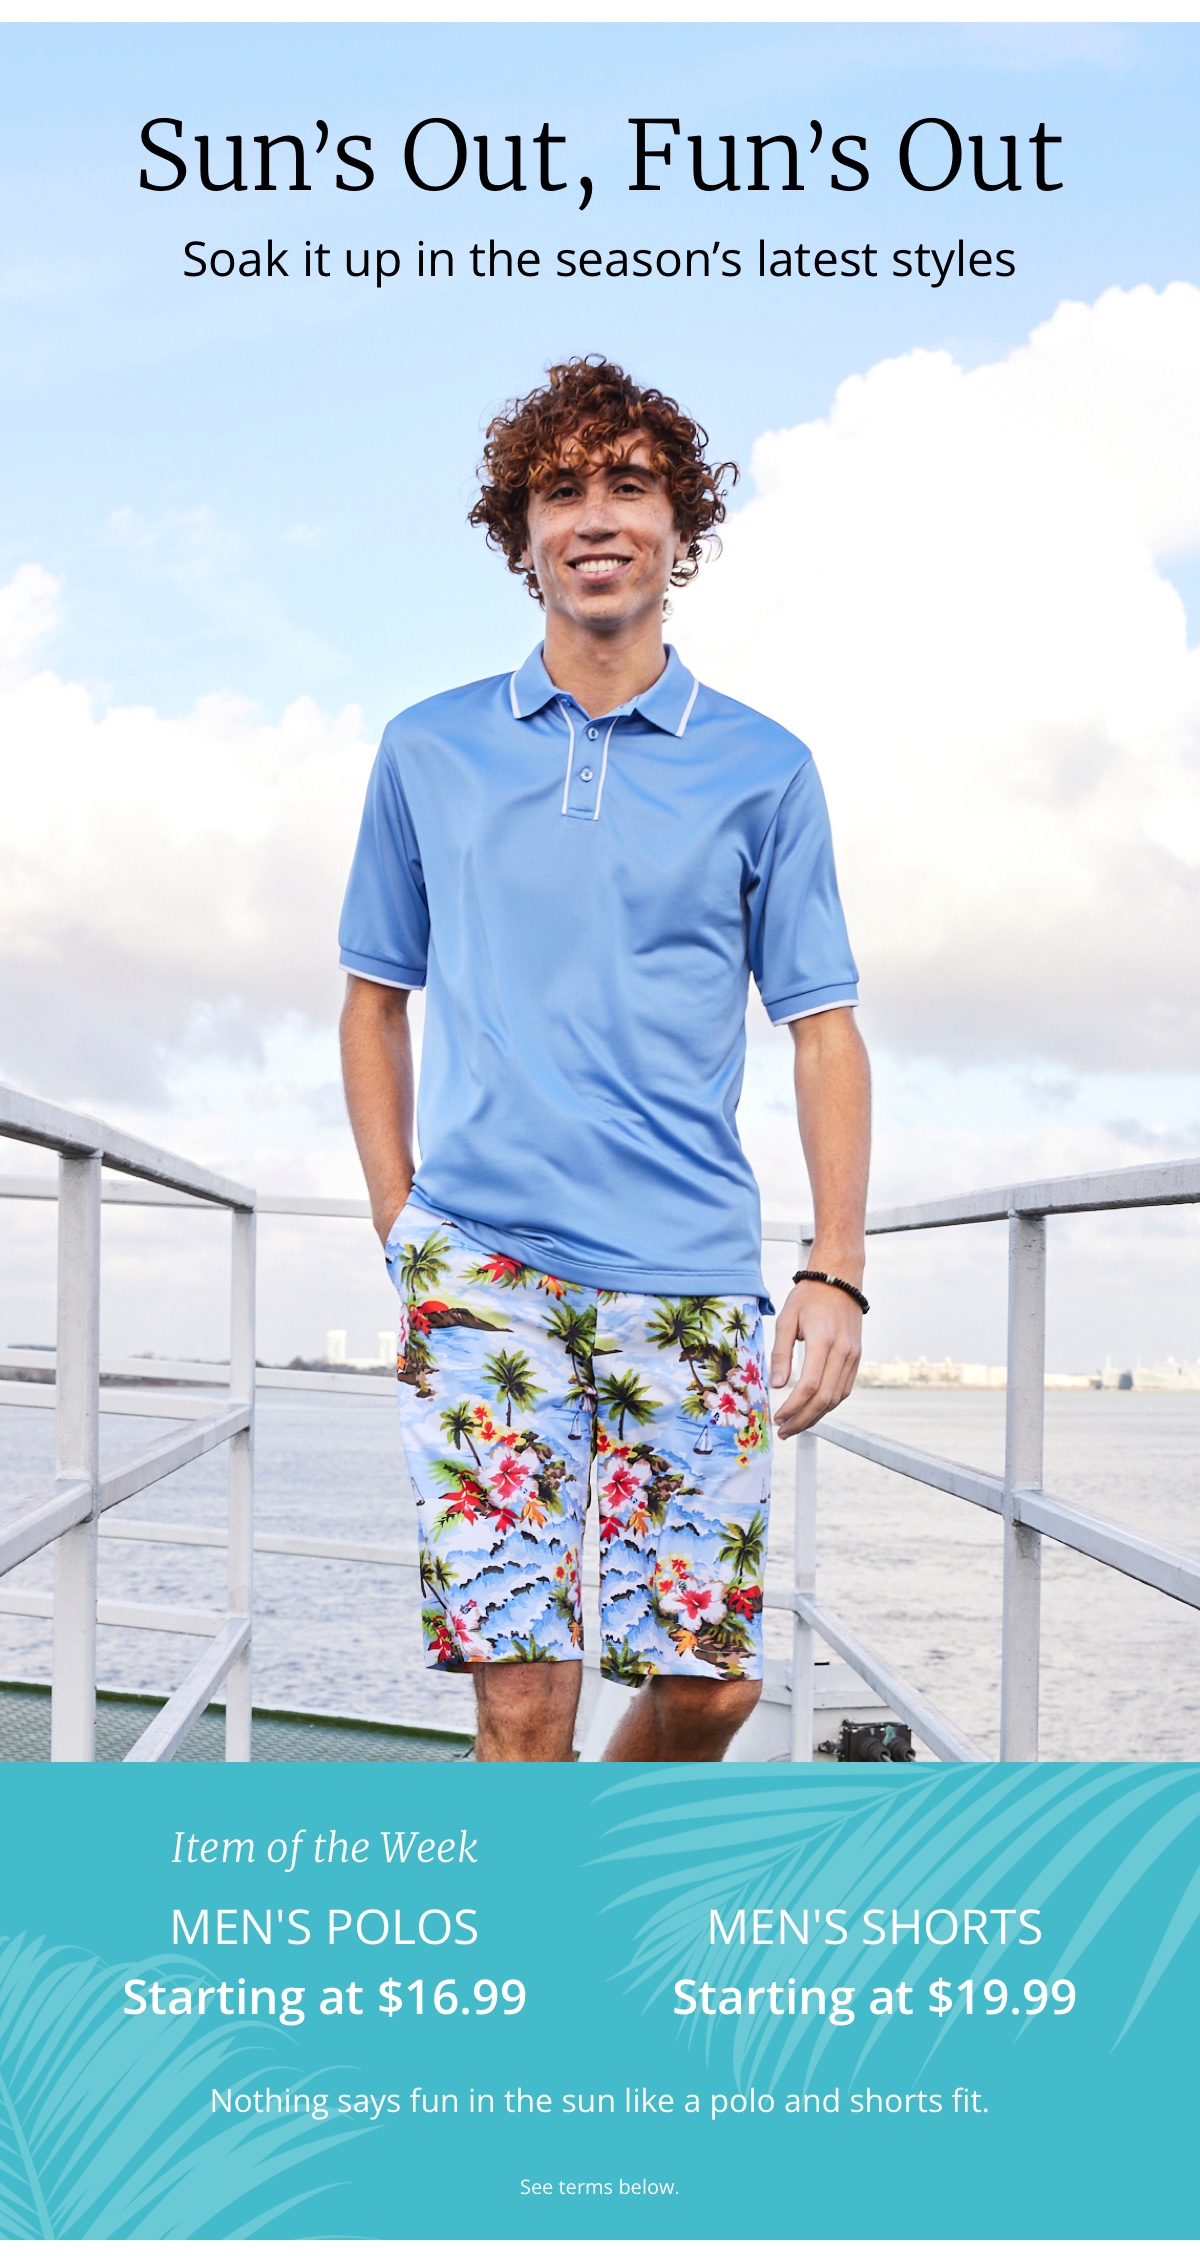 Suns Out, Funs Out |Soak it up in the seasons latest styles|Item of the Week |Men s Polos starting at $16.99|Men s Shorts starting at $19.99|Nothing says fun in the sun like a polo and shorts fit.|See terms below. 